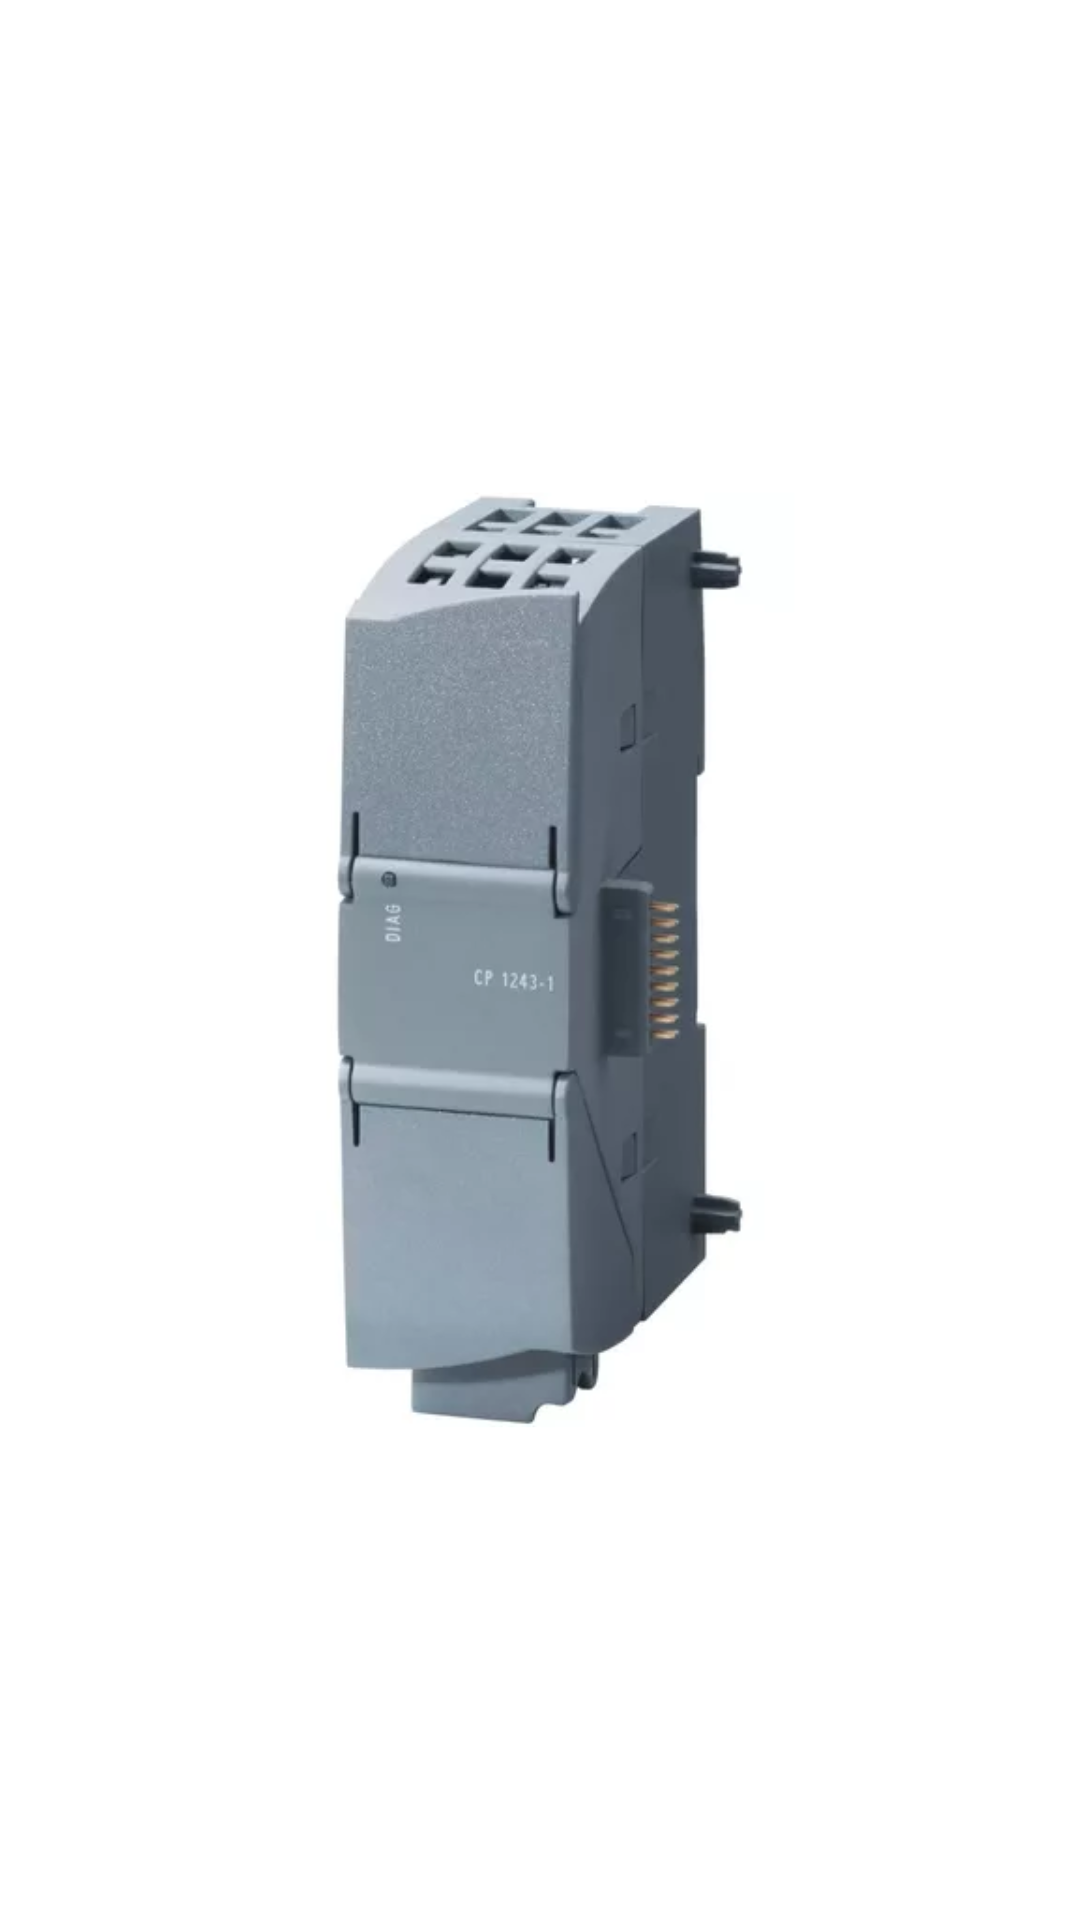 6GK7243-1BX30-0XE0 Siemens Communications processor CP 1243-1 for connection of SIMATIC S7-1200 as additional Ethernet interface